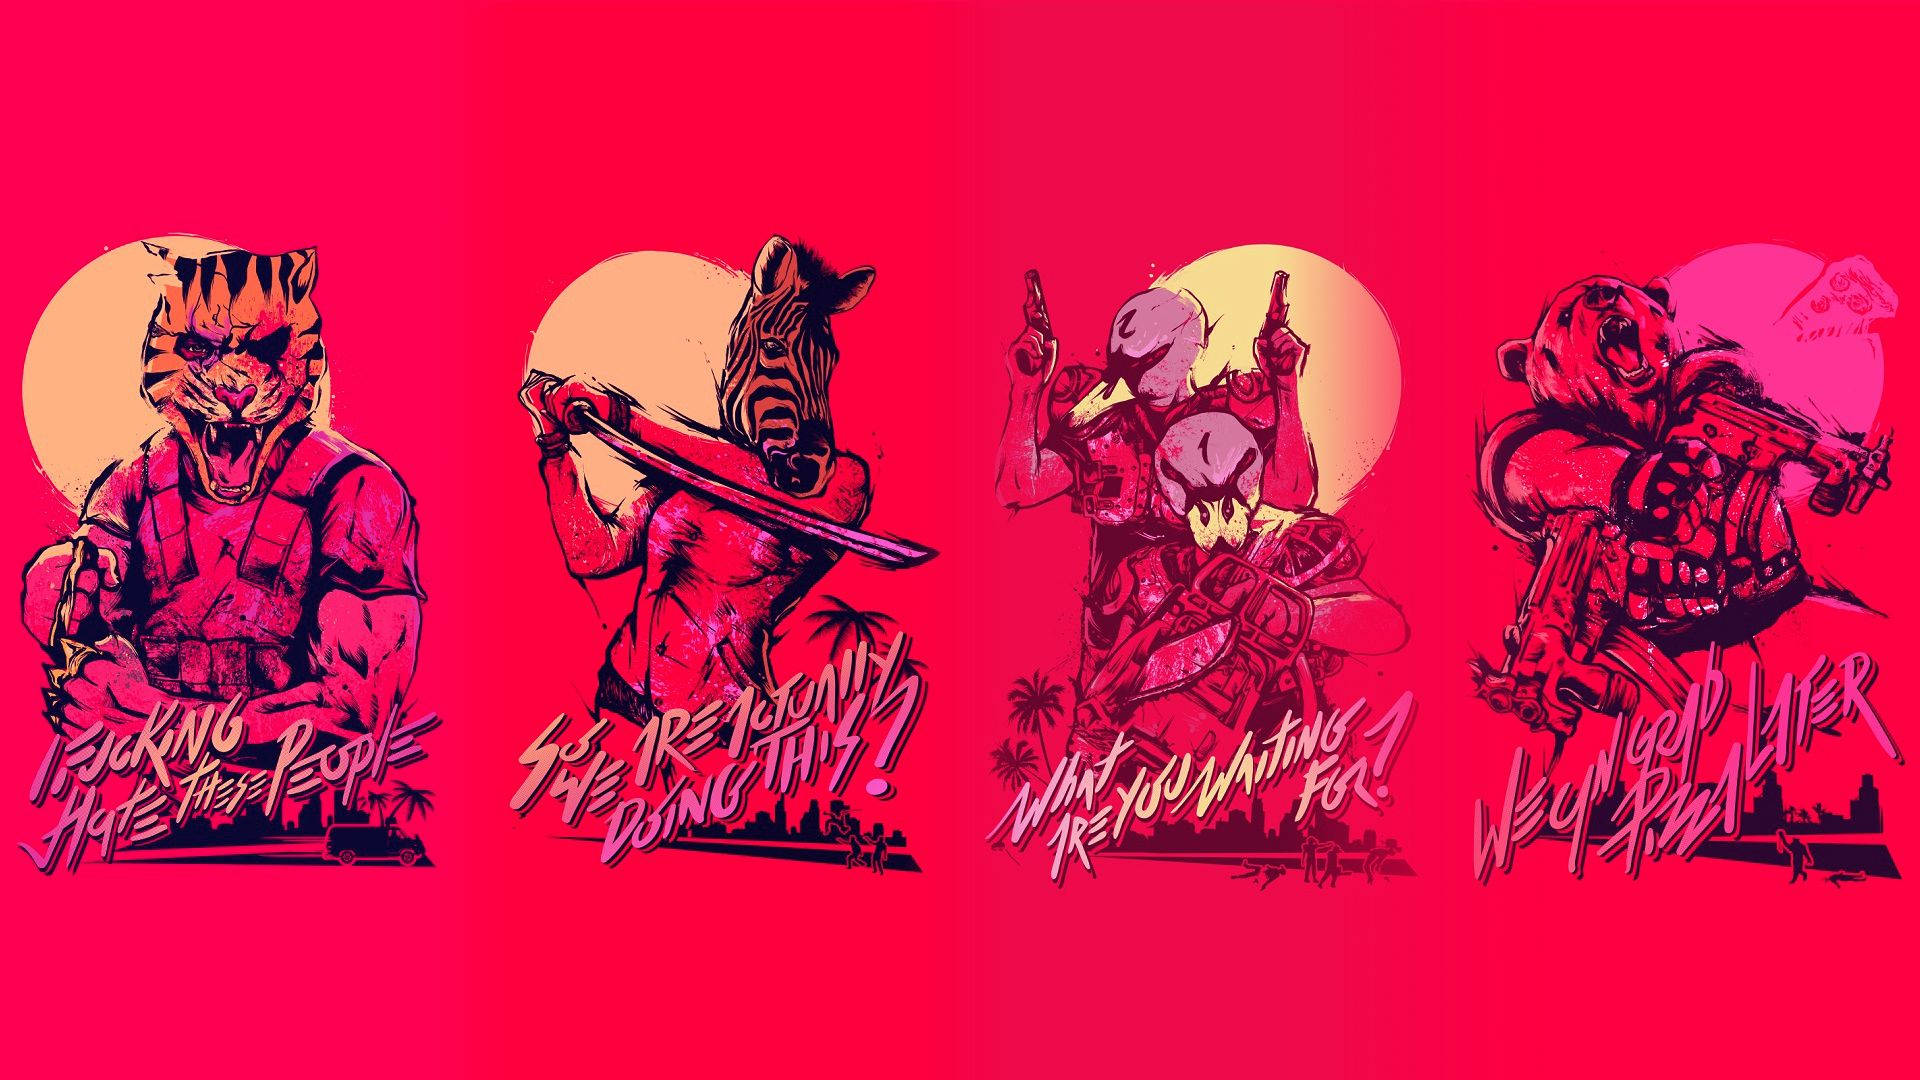 Hotline Miami 1920X1080 Wallpaper and Background Image